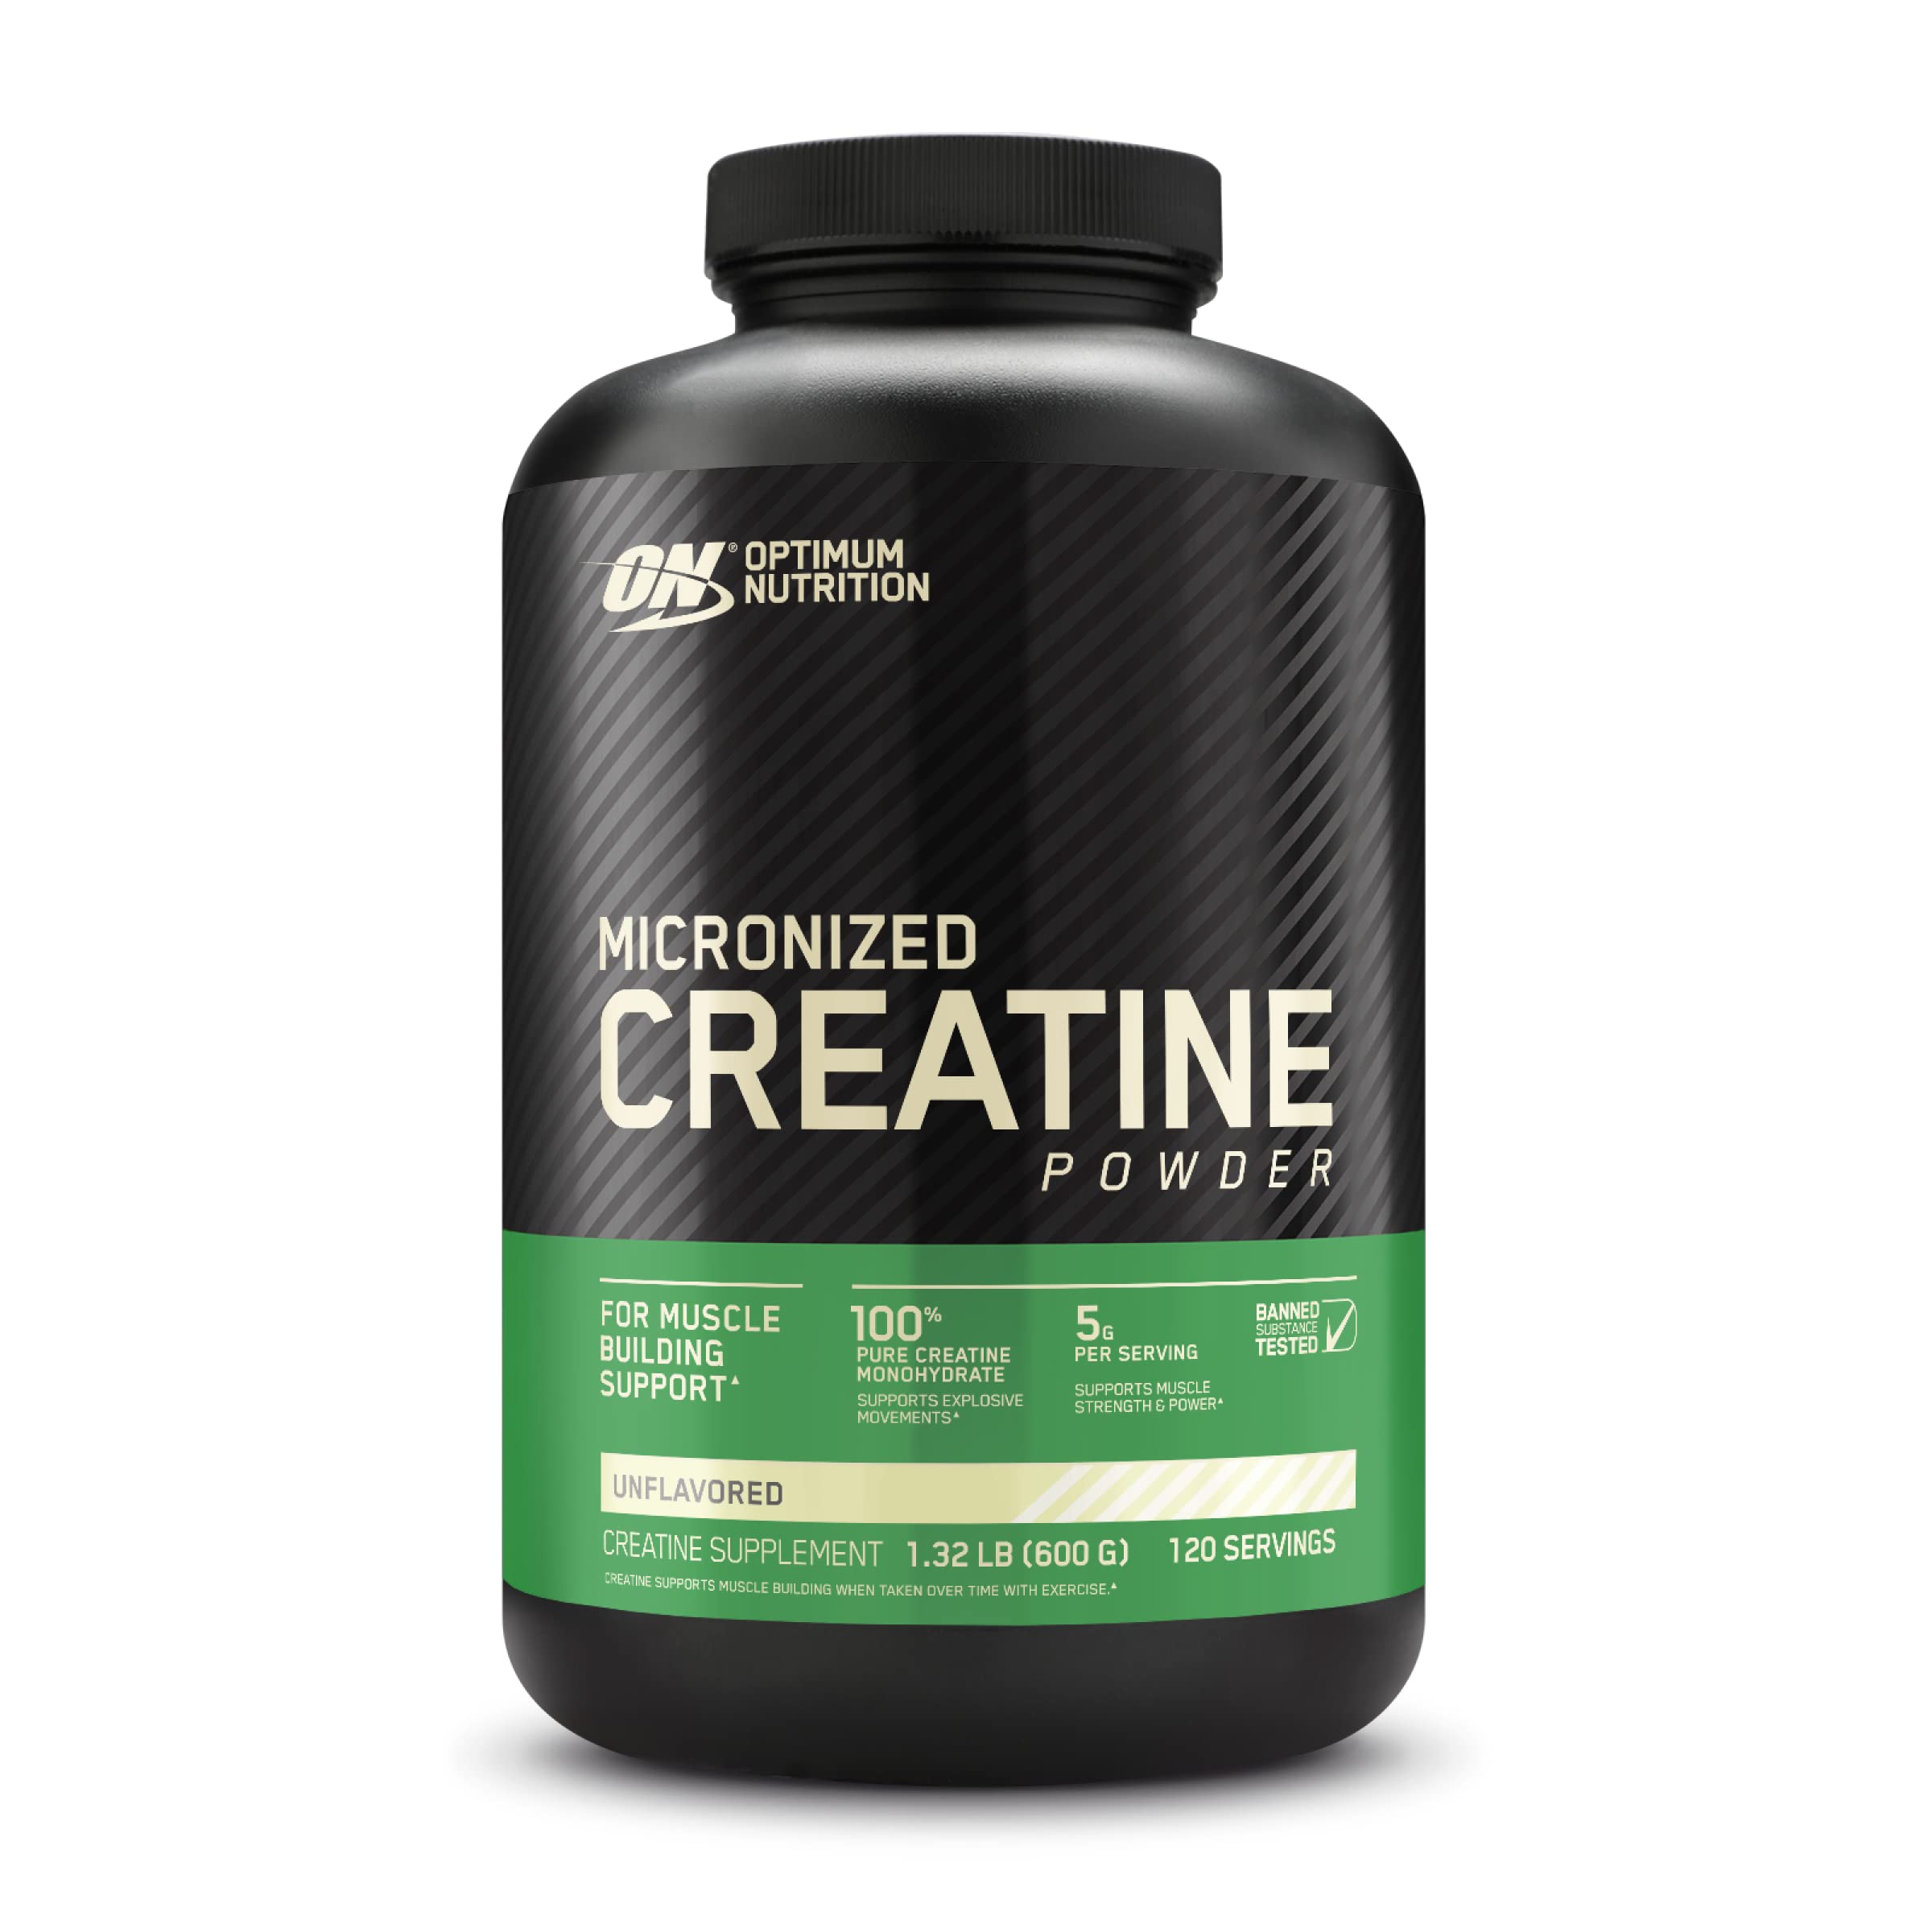 Optimum Nutrition Amino Energy - Pre Workout with Green Tea, BCAA, Amino Acids & Micronized Creatine Monohydrate Powder, Unflavored, Keto Friendly, 120 Servings (Packaging May Vary)